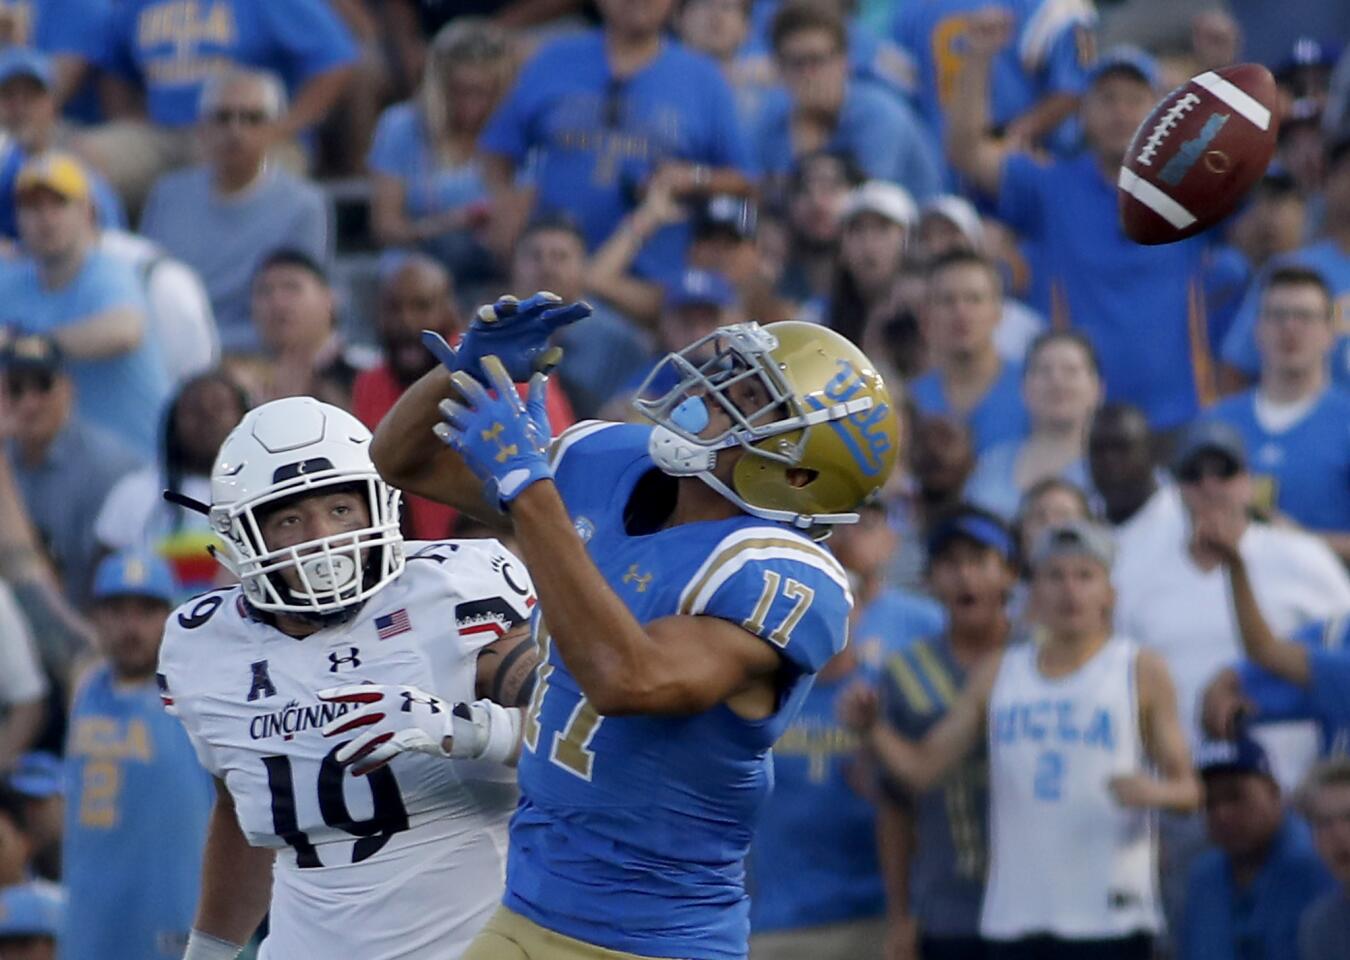 UCLA wide receiver Christian Pabico can't find the handle on a pass as Cincinnati's Ethan Tucky defends in the third quarter at the Rose Bowl in Pasadena on Saturday.